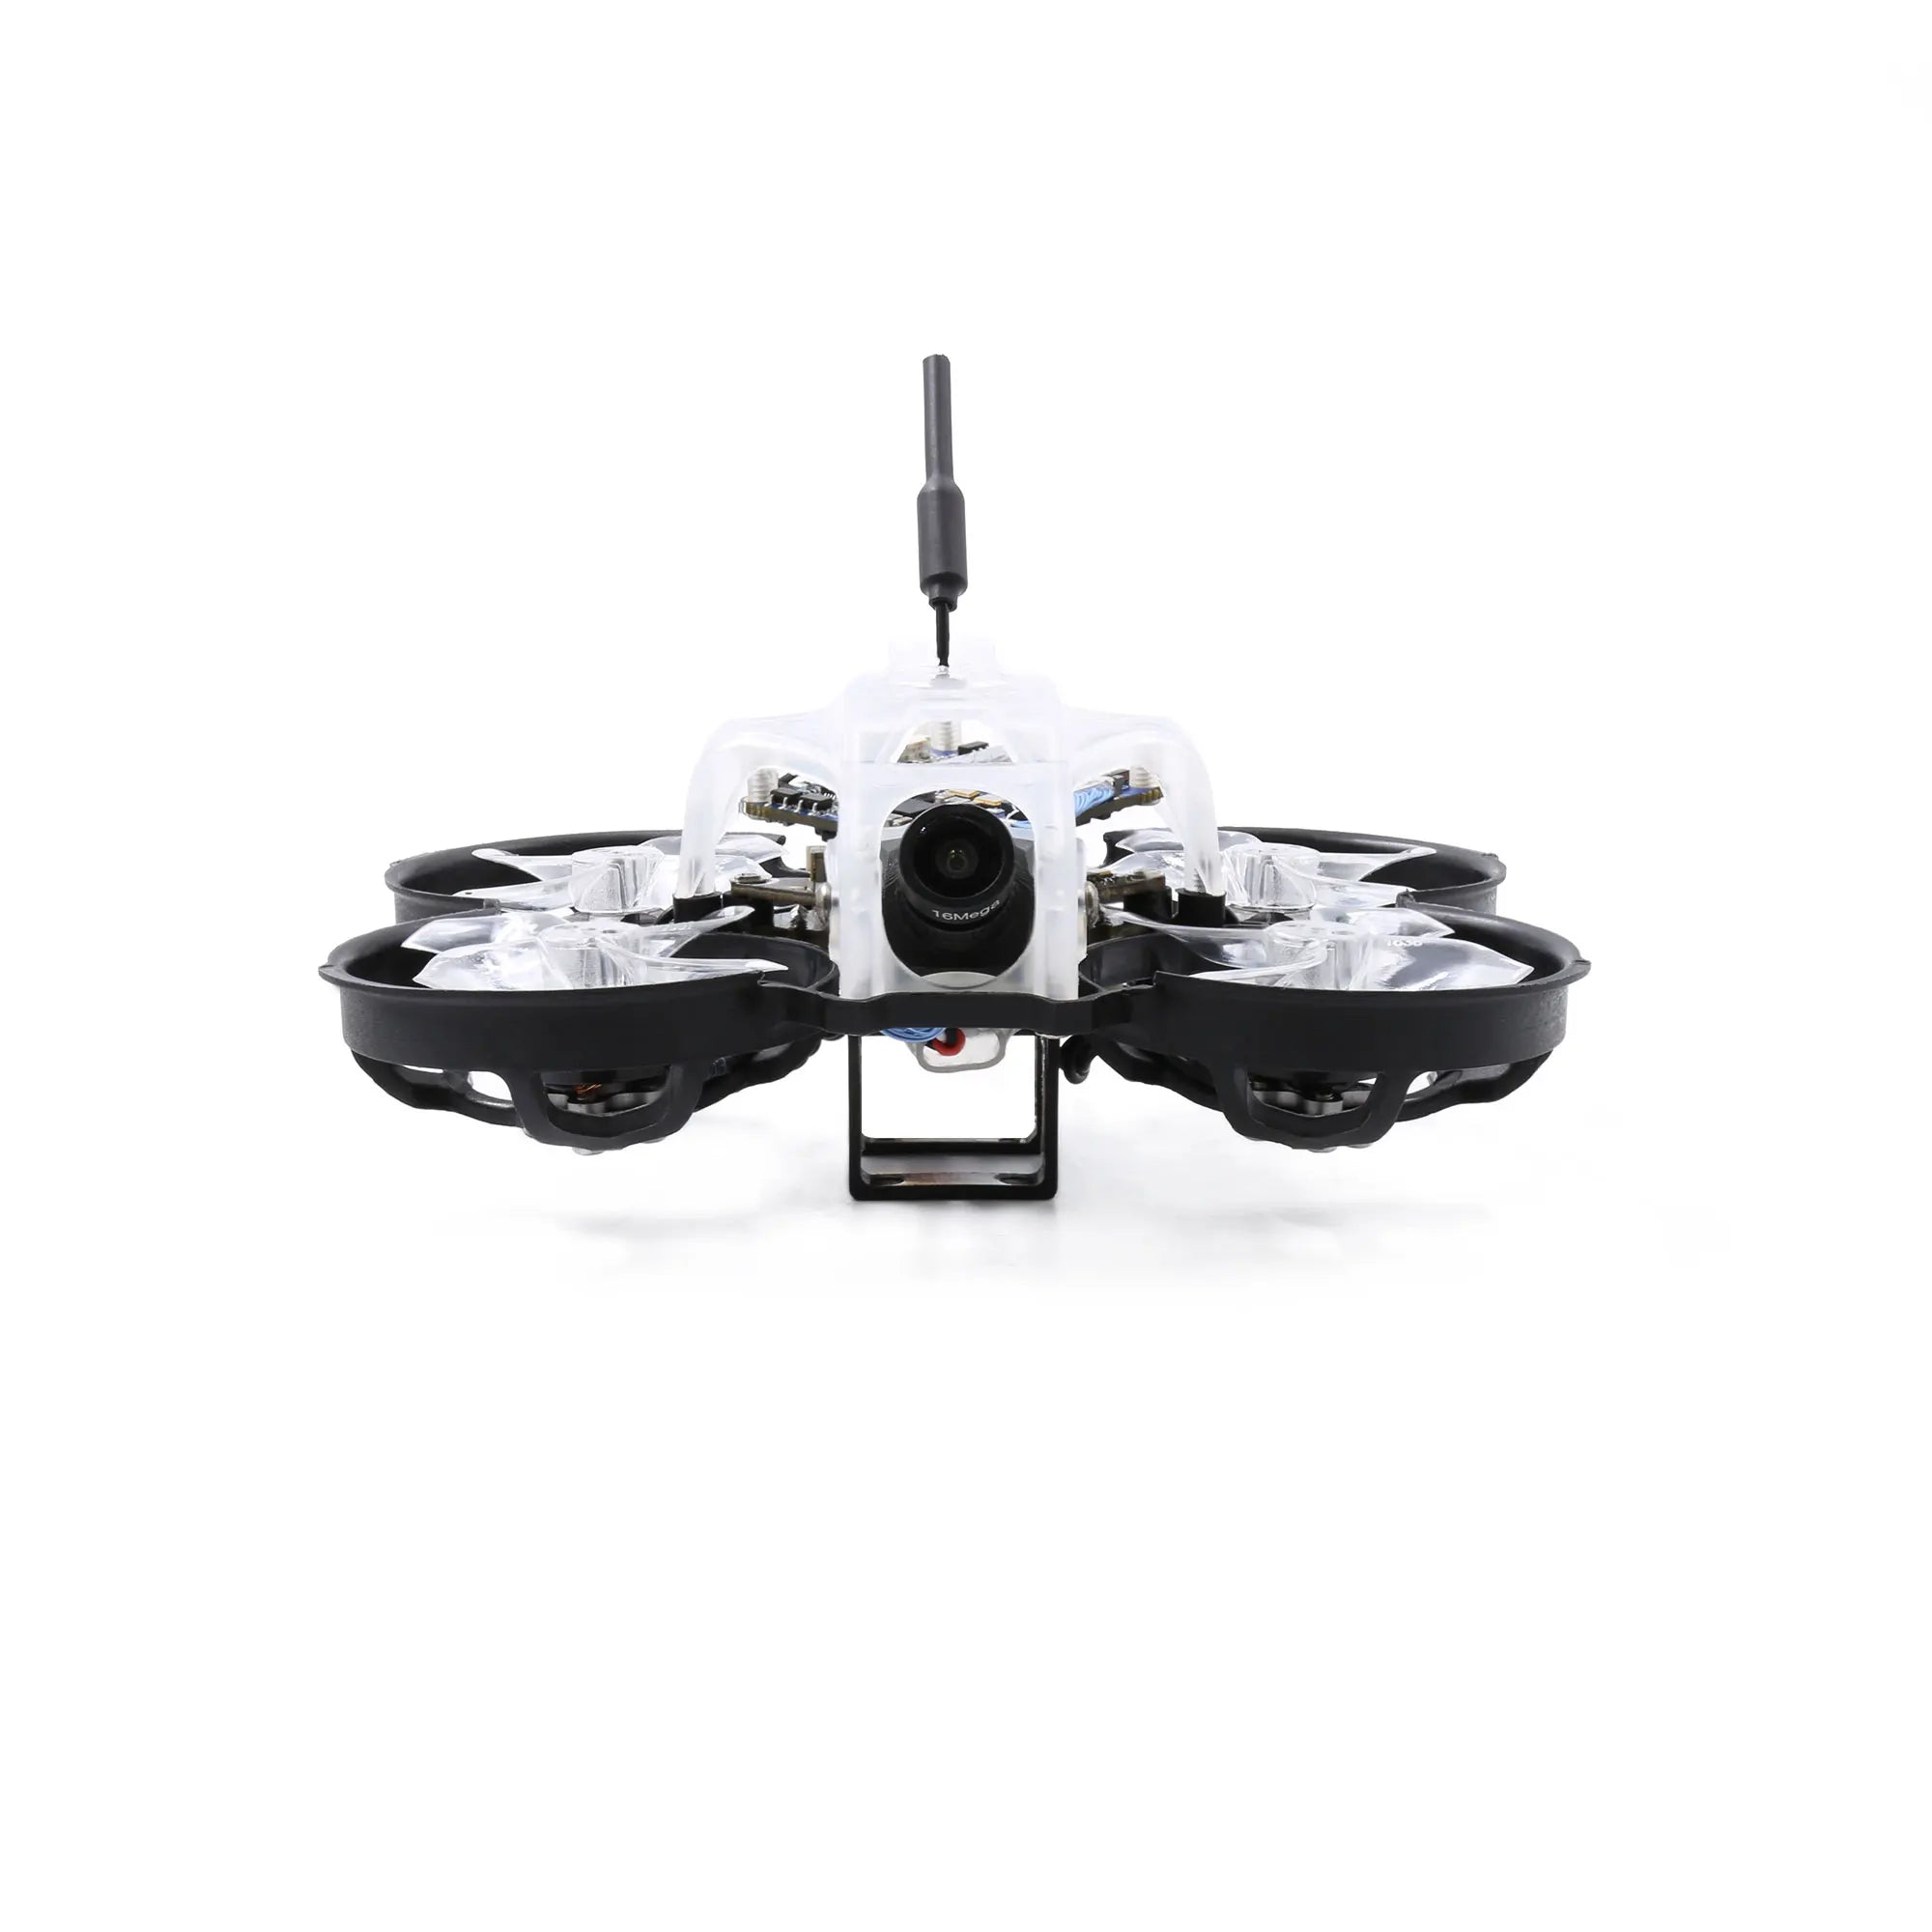 GEPRC Thinking P16 FPV Drone, Weighs only 55g w/o battery and receiver